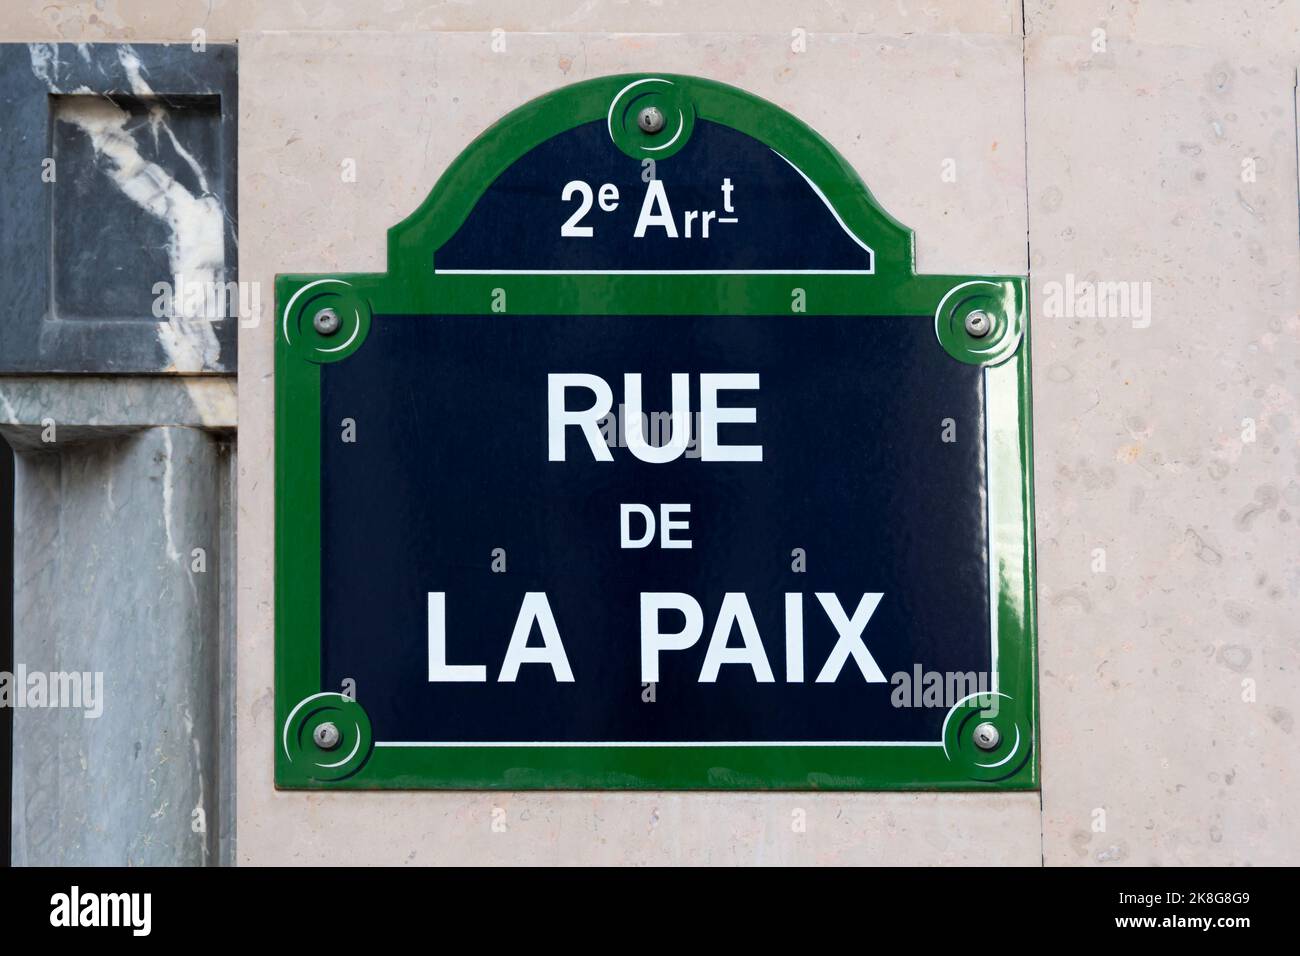 Traditional Parisian street sign with 'Rue de la Paix' (meaning 'Peace street') written on it, Paris, France Stock Photo